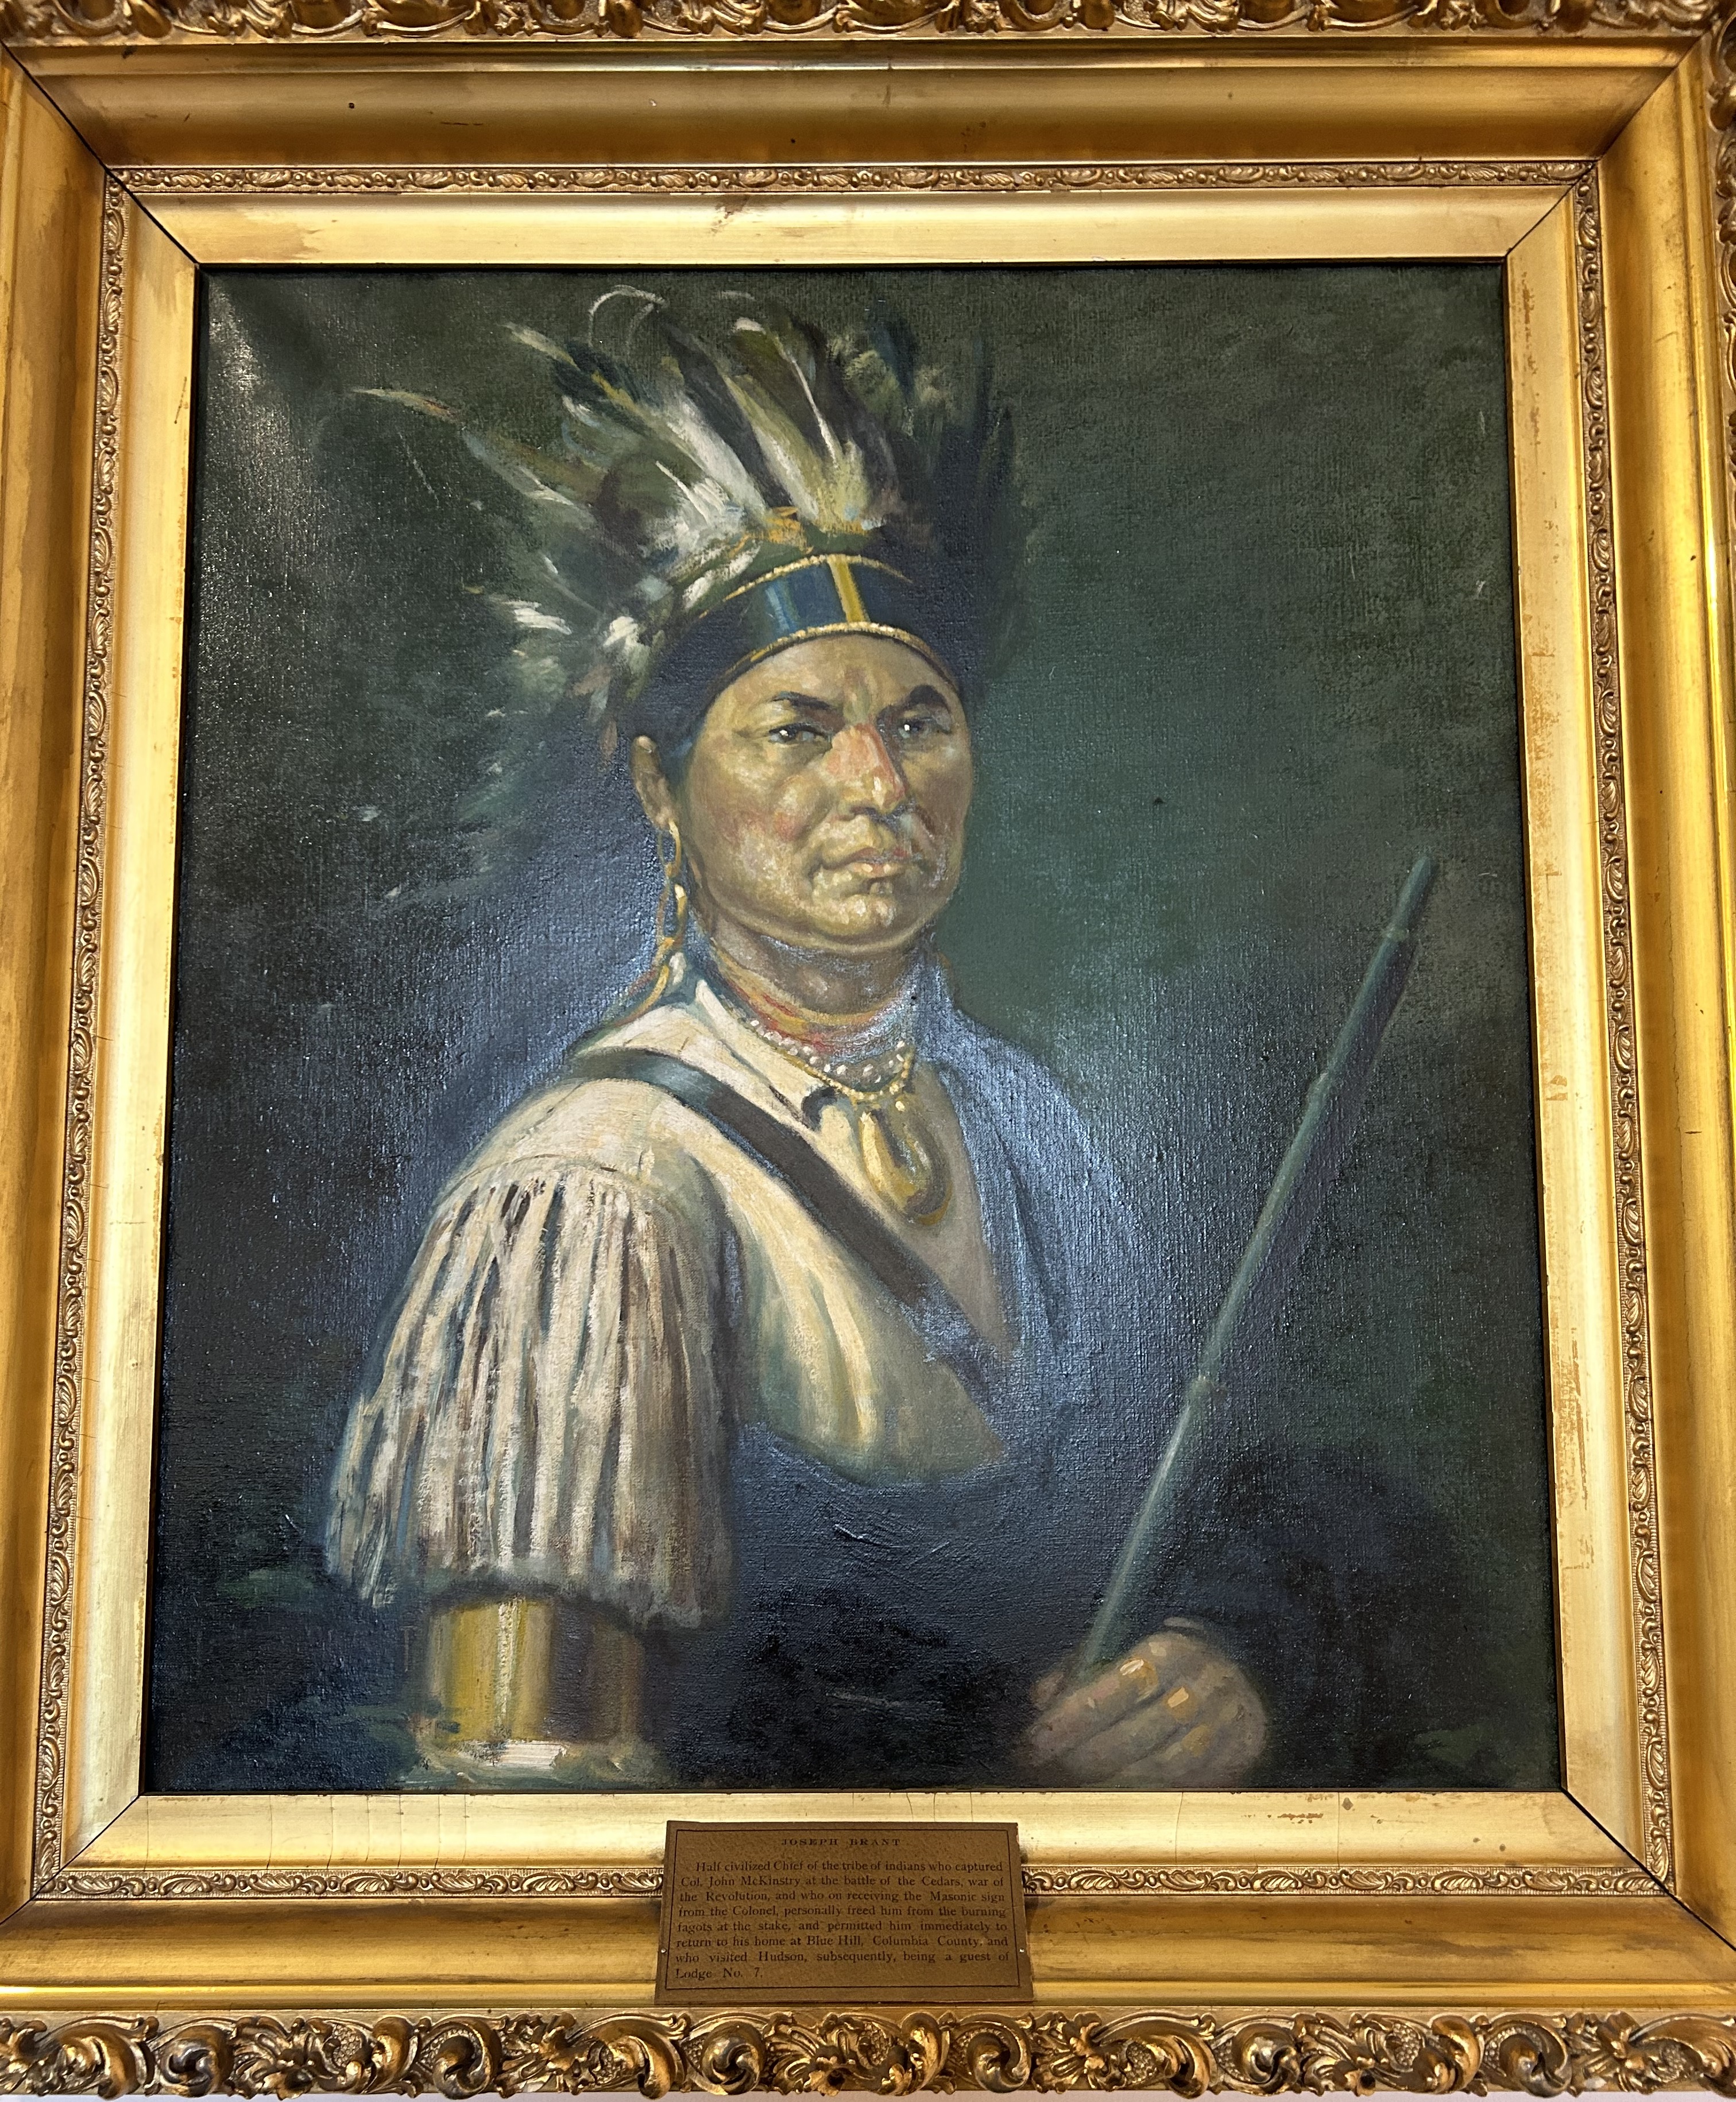 Joseph Brant, portrait which formerly hung in Hudson Lodge 